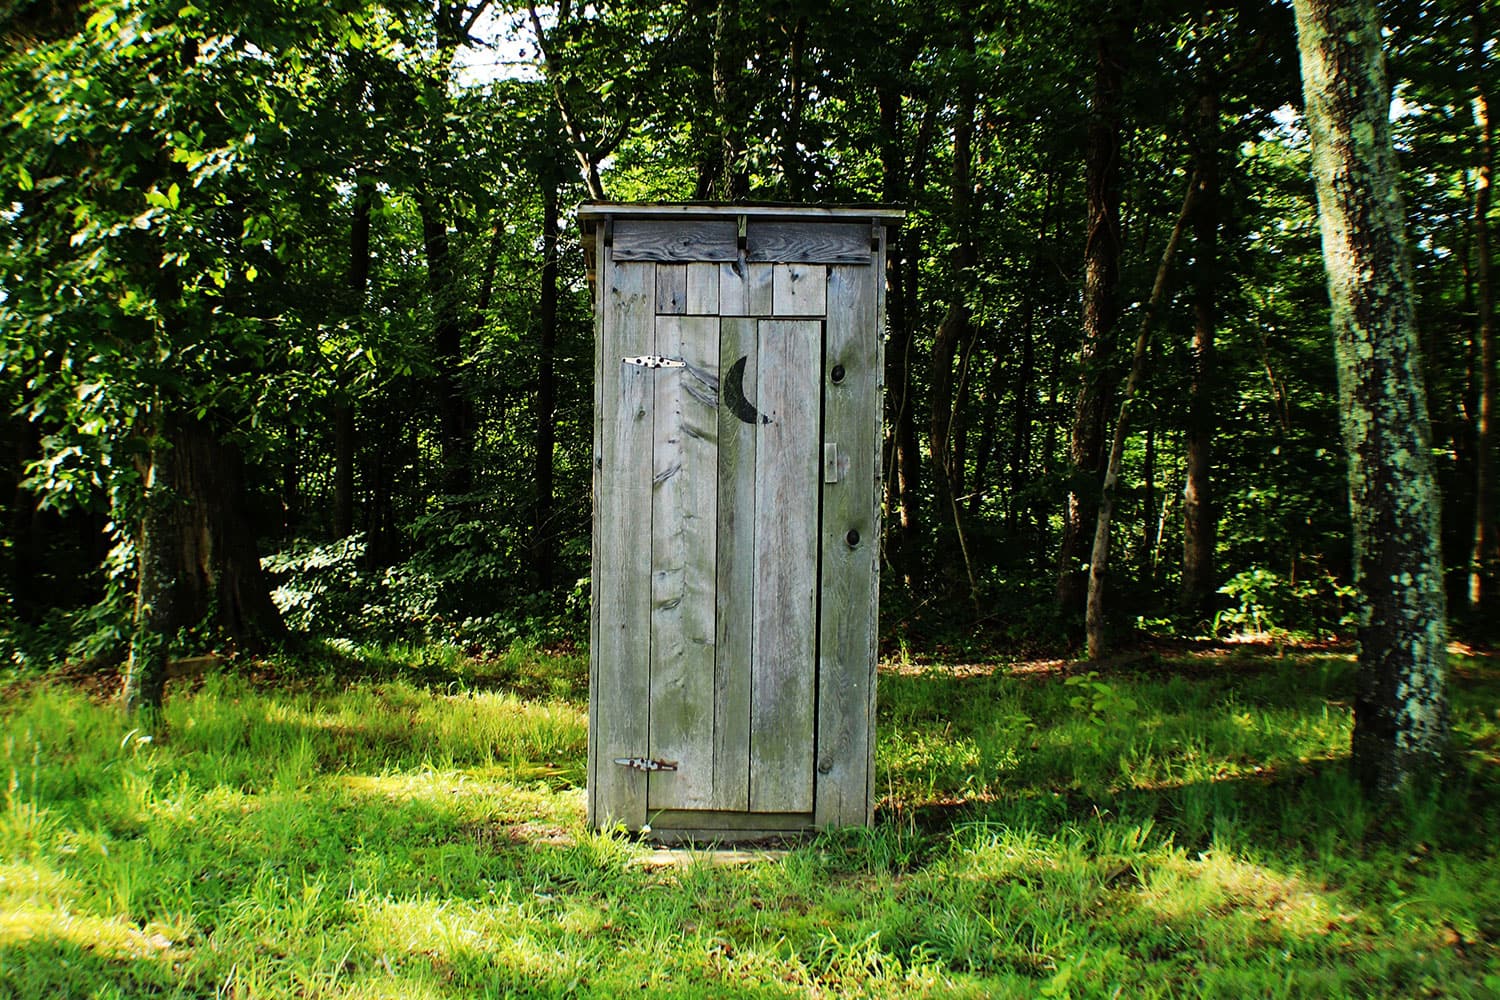 Types of Toilets Around the World - wooden outhouse